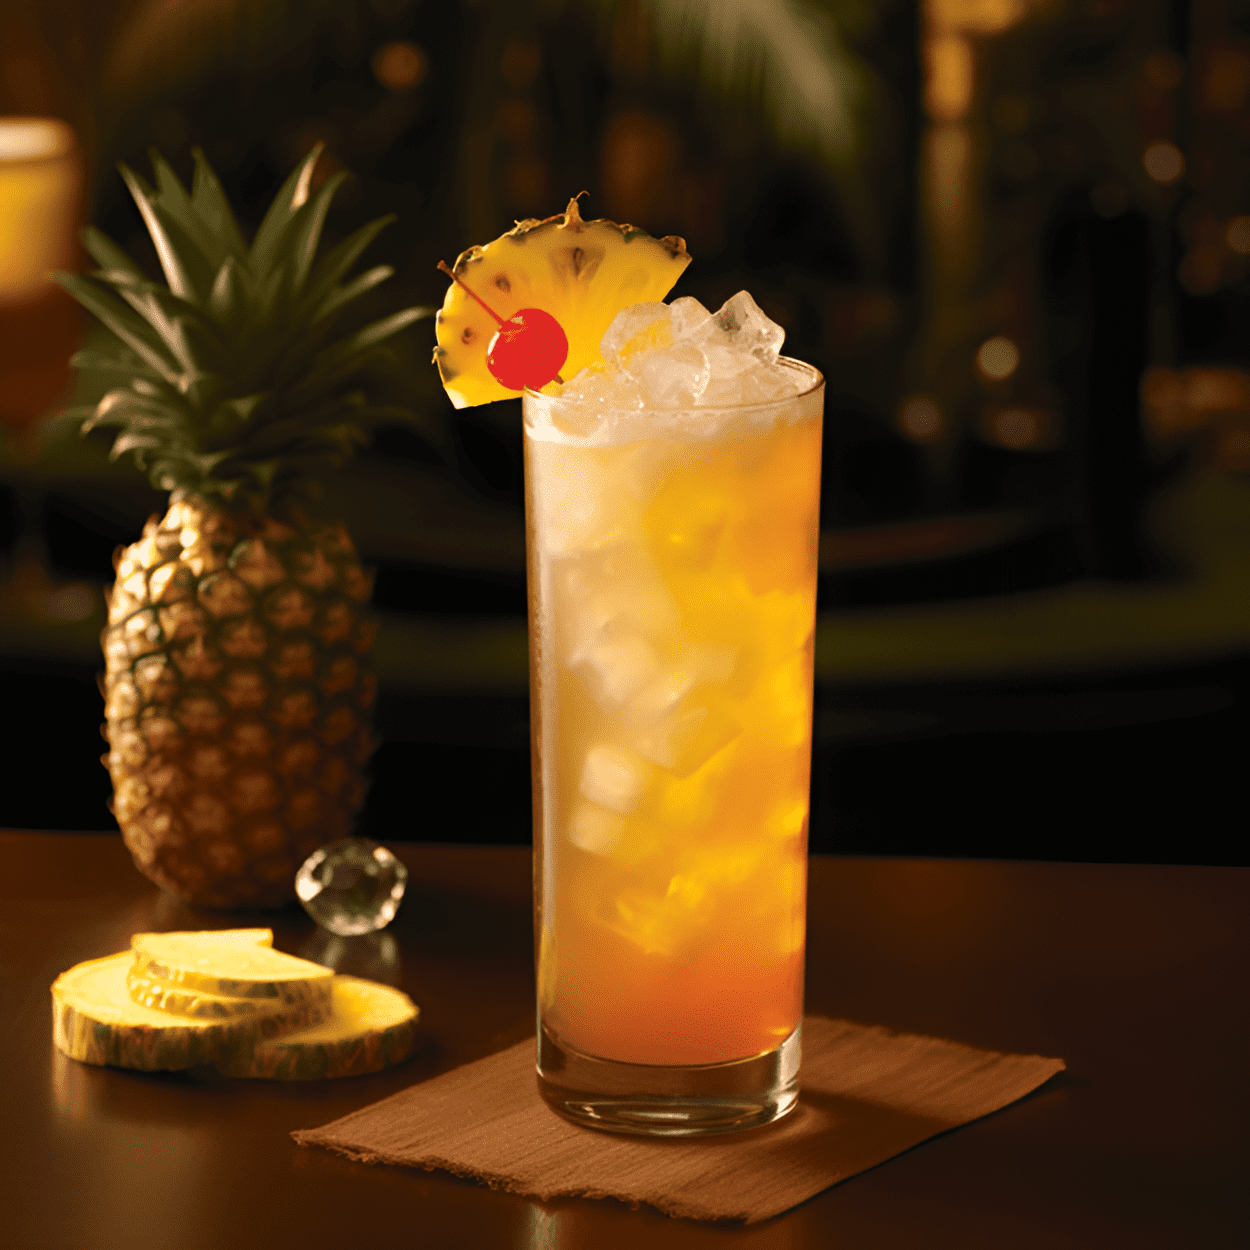 Captain's Bounty Cocktail Recipe - The Captain's Bounty is a robust, full-bodied cocktail. It's strong, with the rum providing a powerful punch. The pineapple juice adds a sweet, tropical note, while the lime juice gives it a slight tartness. The hint of ginger brings a warm, spicy undertone, making this a complex and satisfying drink.